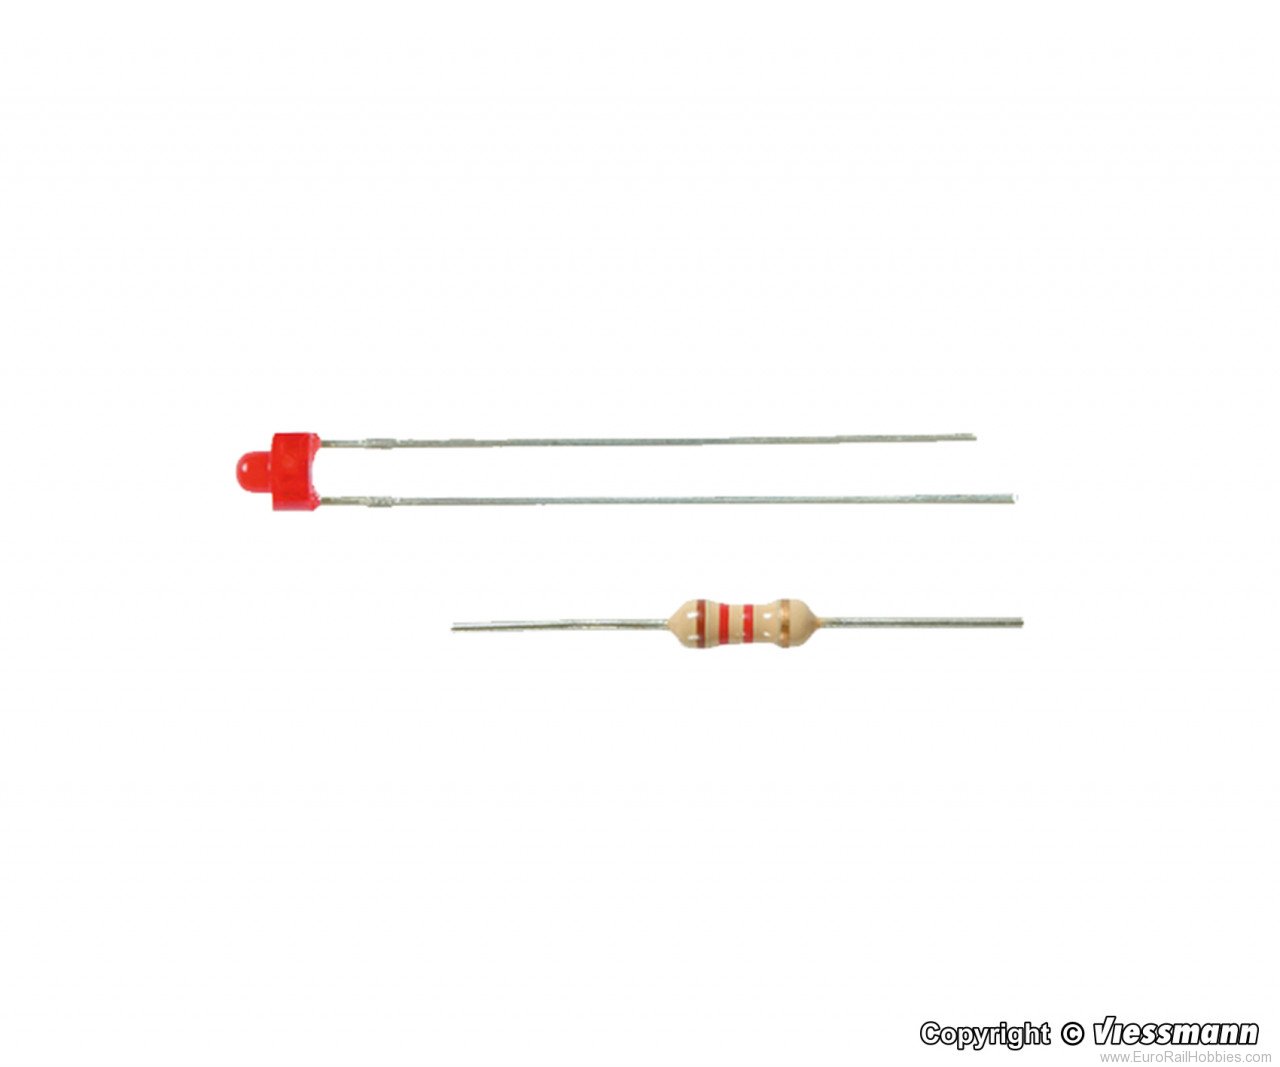 Viessmann 3553 LED red O 1,8 mm, inkl. resistors, 3 pieces